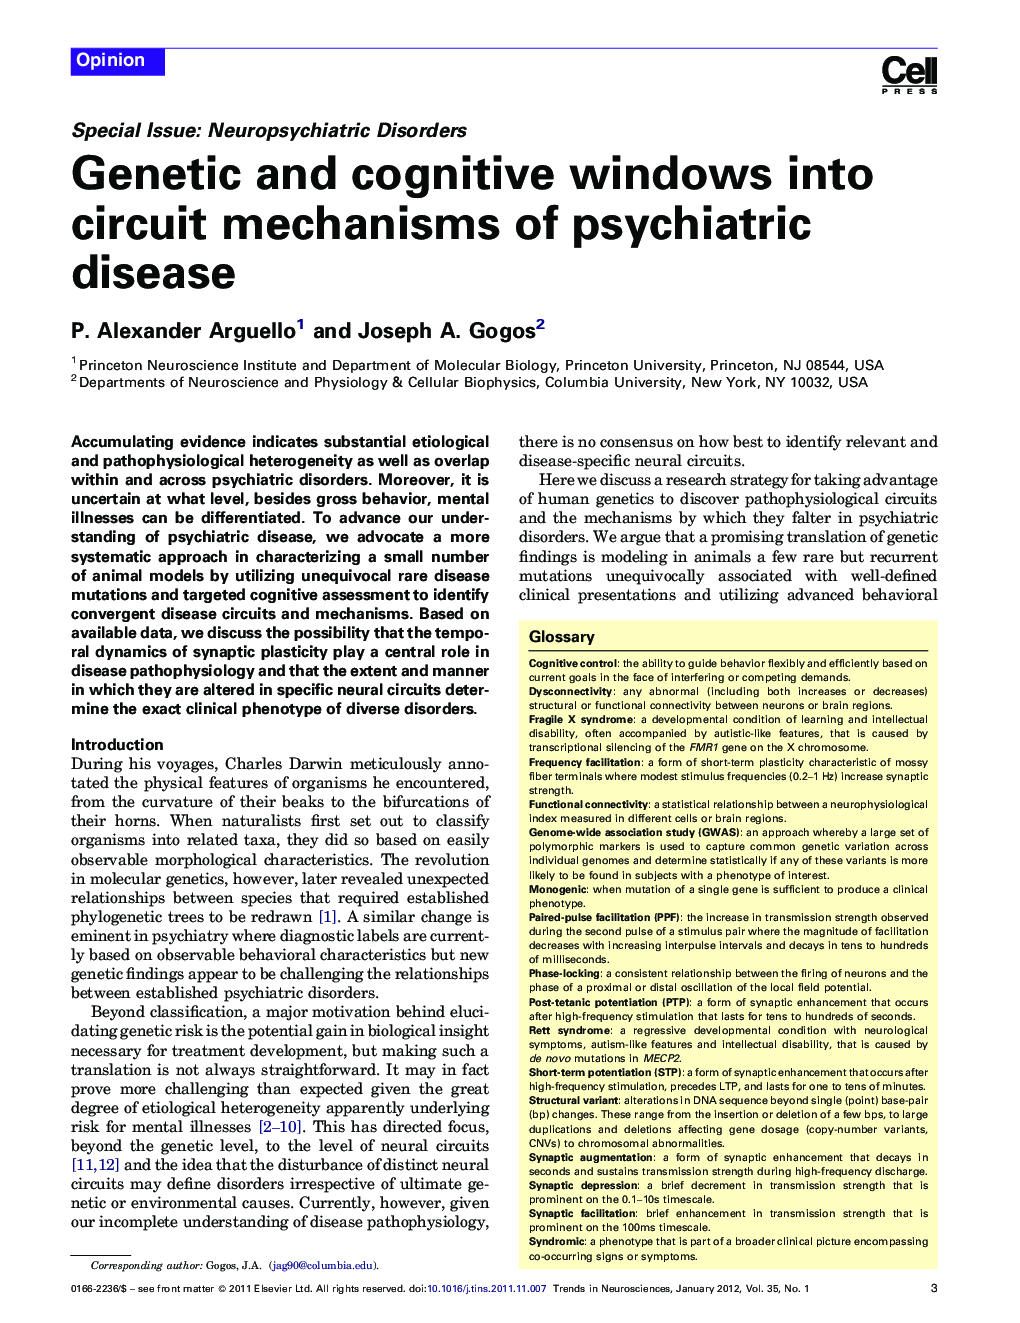 Genetic and cognitive windows into circuit mechanisms of psychiatric disease